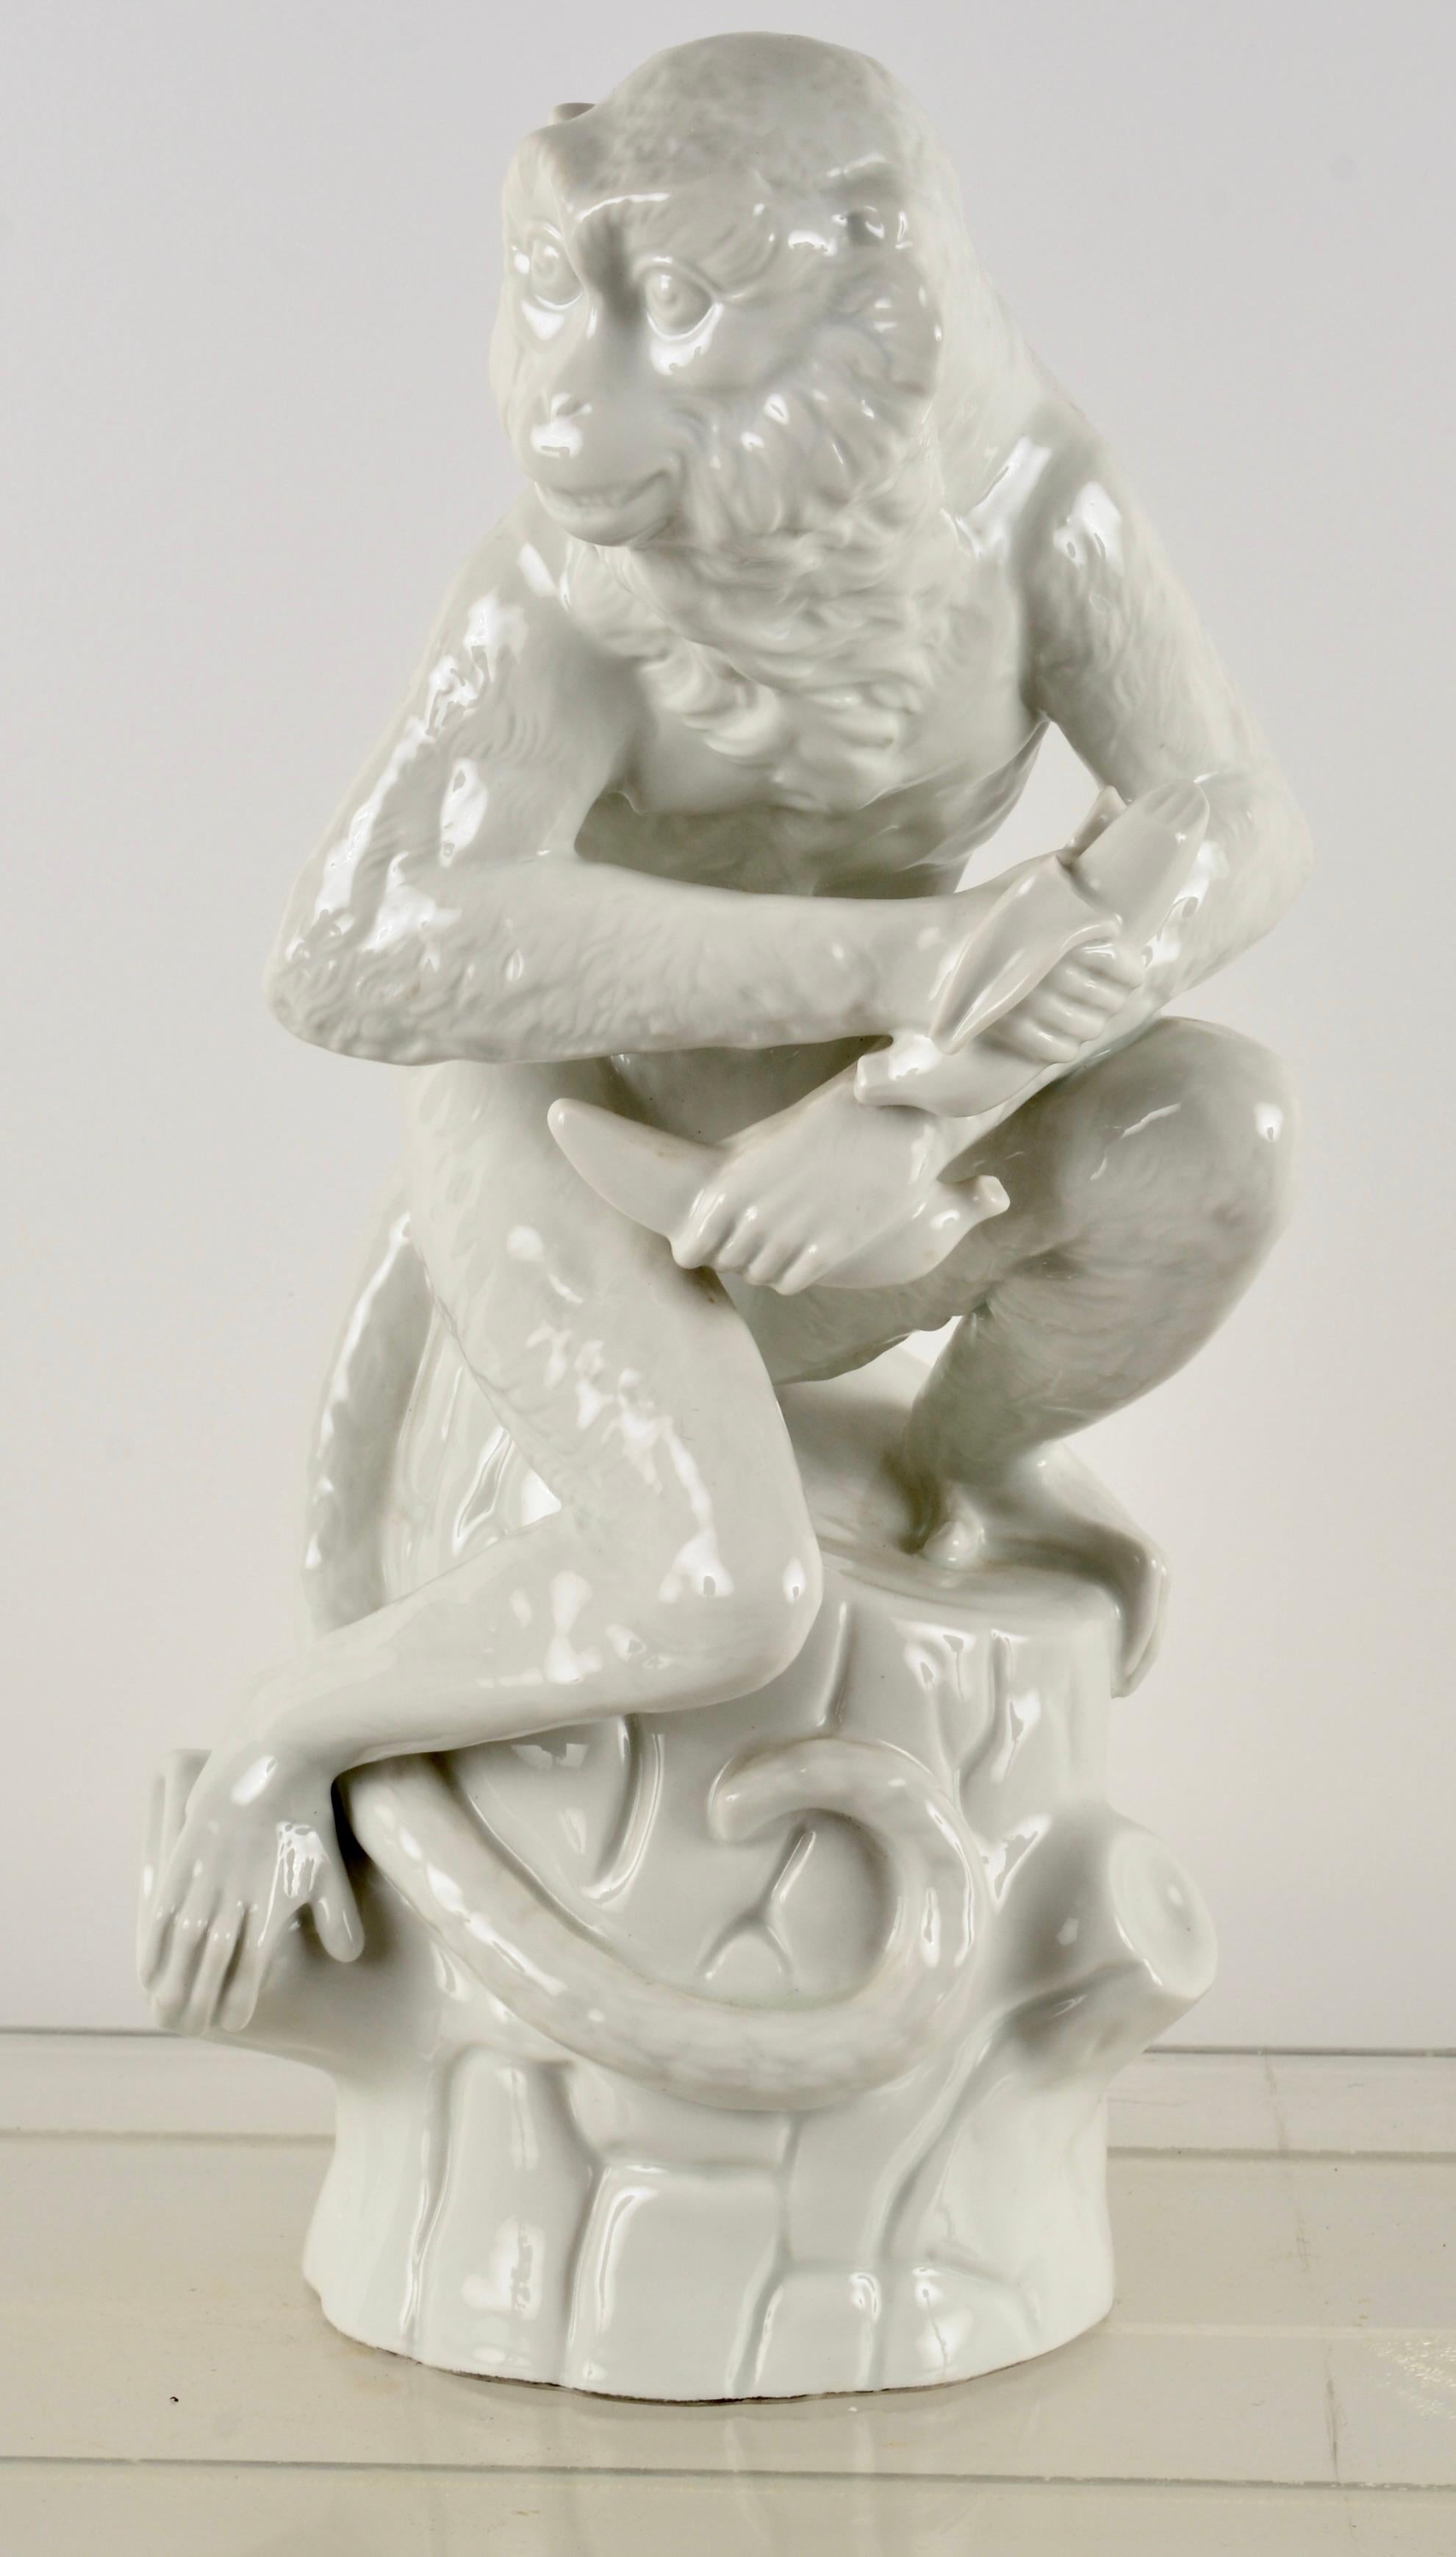 Made by the KPM, Real Porcelain Factory in Berlin, Germany, this beautifully crafted figure features a monkey eating bananas. The attention to detail and fine glaze are outstanding. Very good condition, no damage or wear.